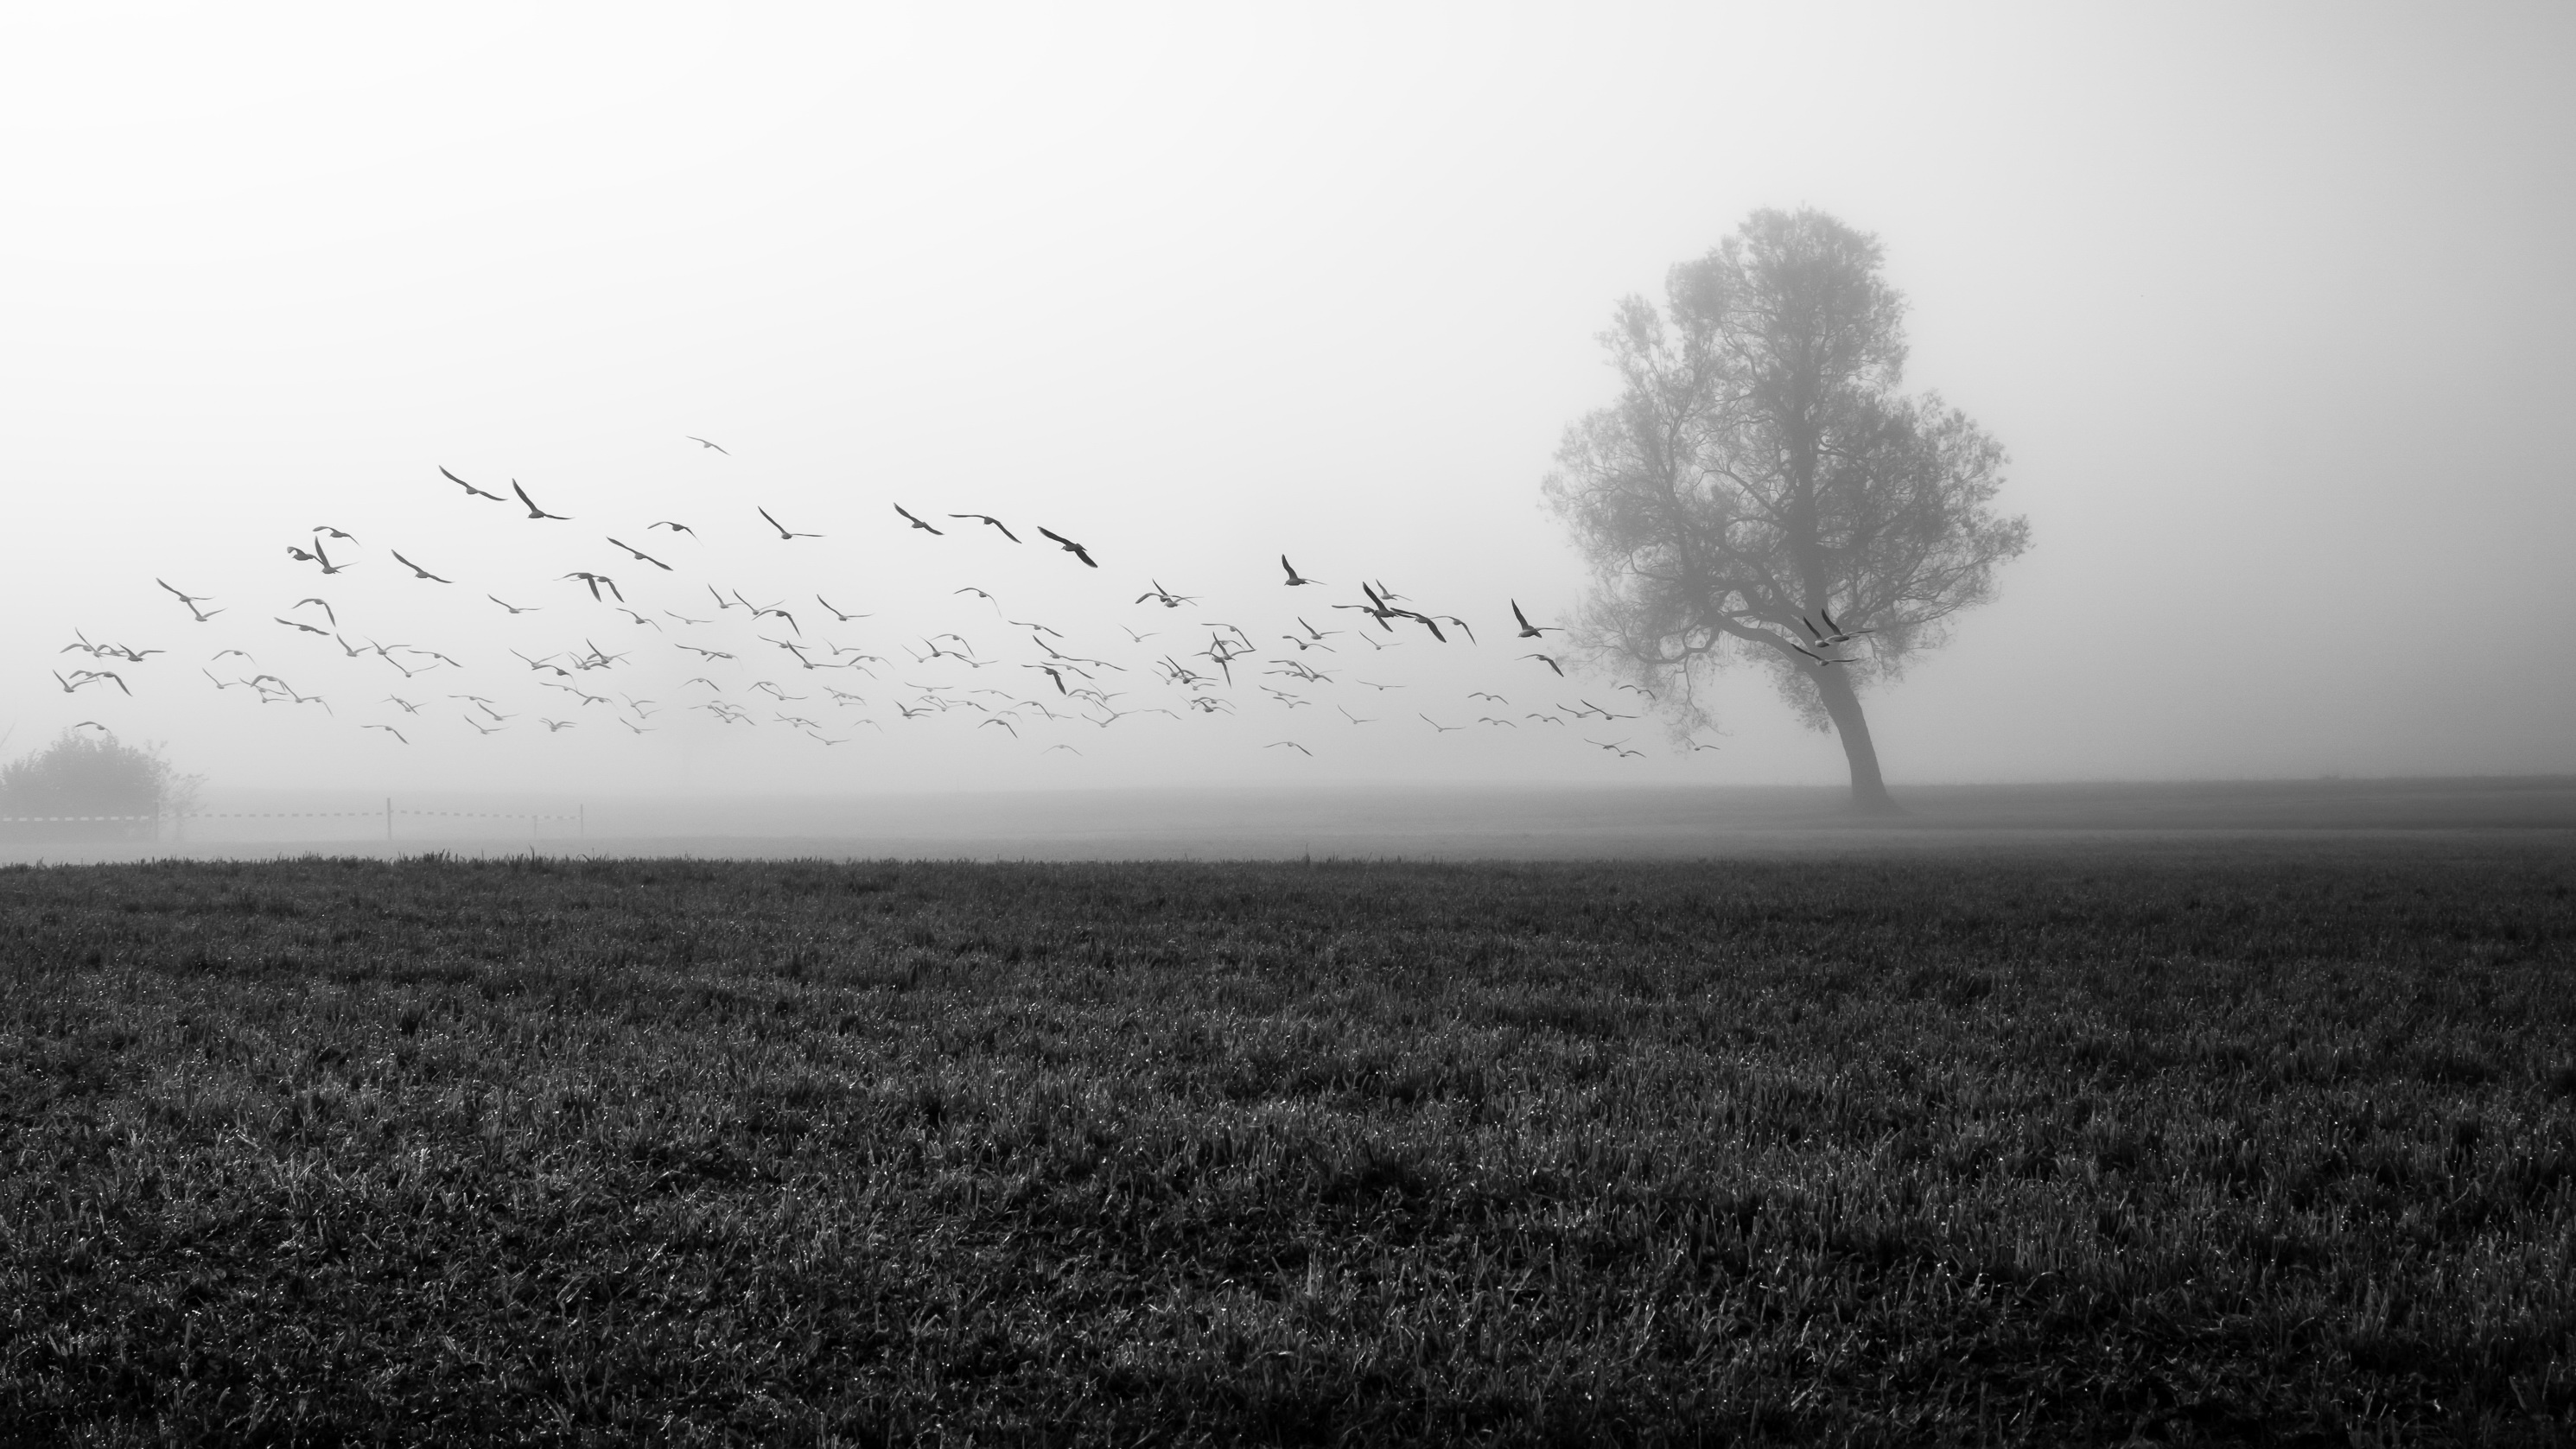 earth, fog, black & white, field, flock of birds, lonely tree, nature, tree